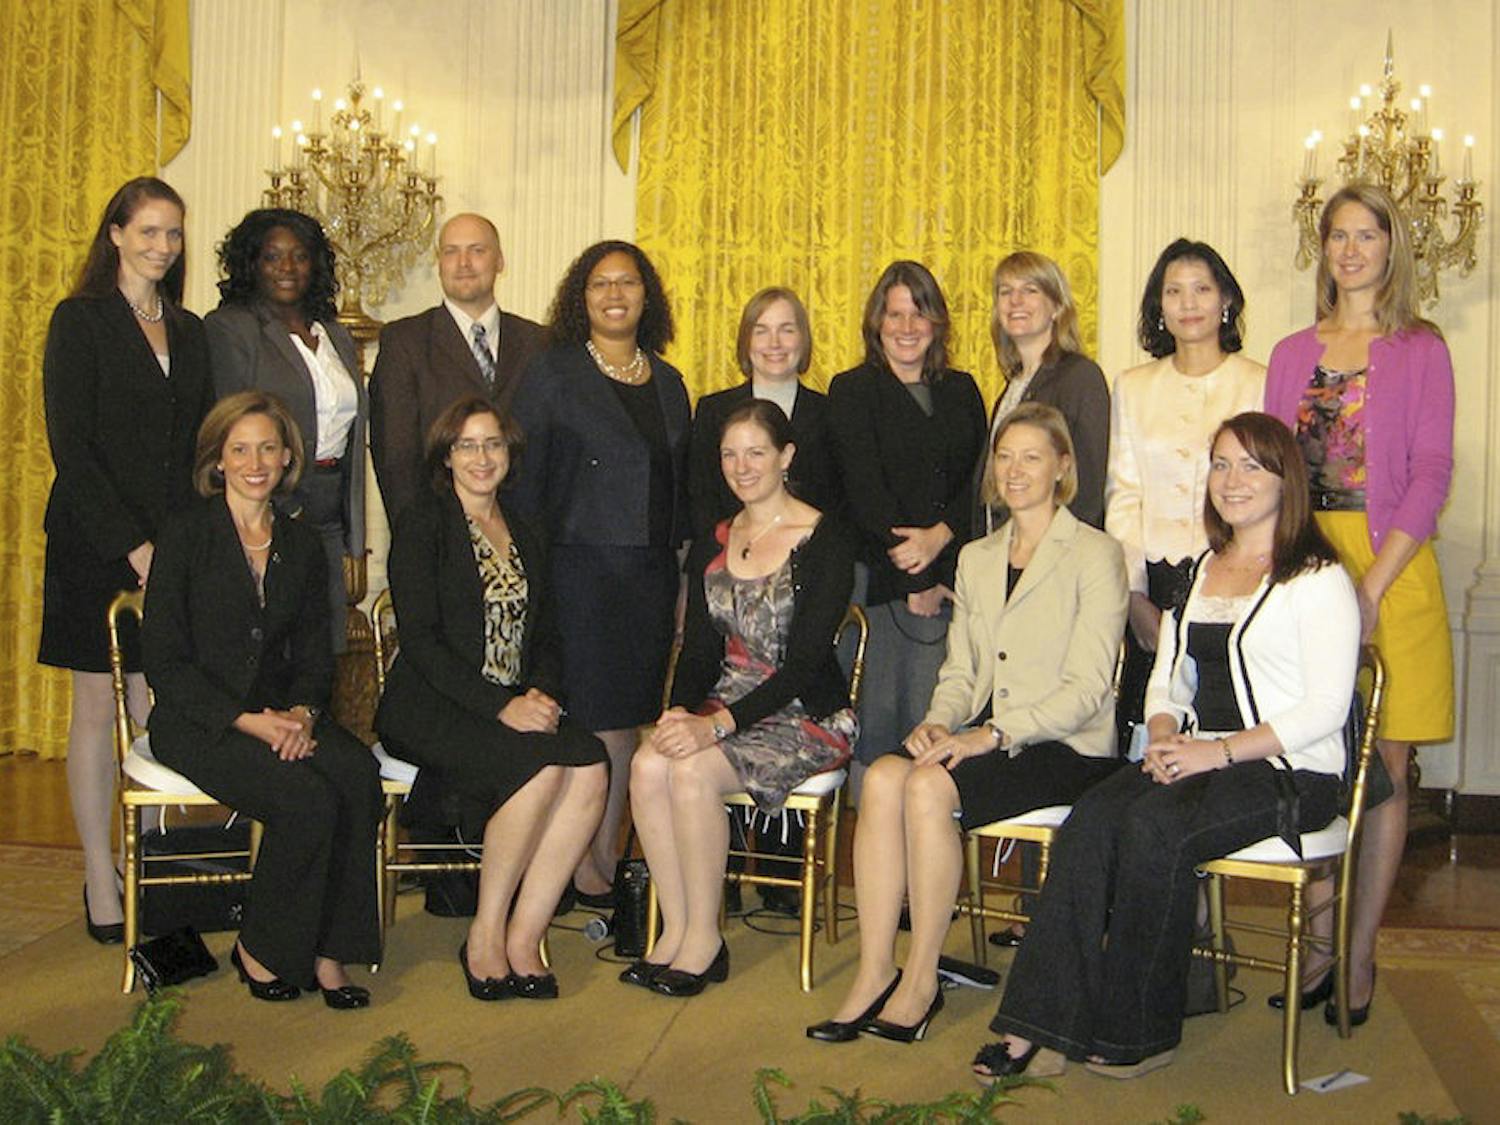 Michele Manuel (fourth from the left, back row), an assistant UF professor in the materials science and engineering department, poses for a photo in the White House. Manuel was one of 106 researchers who were honored by the Presidential Early Career Award for Scientists and Engineers last weekend.